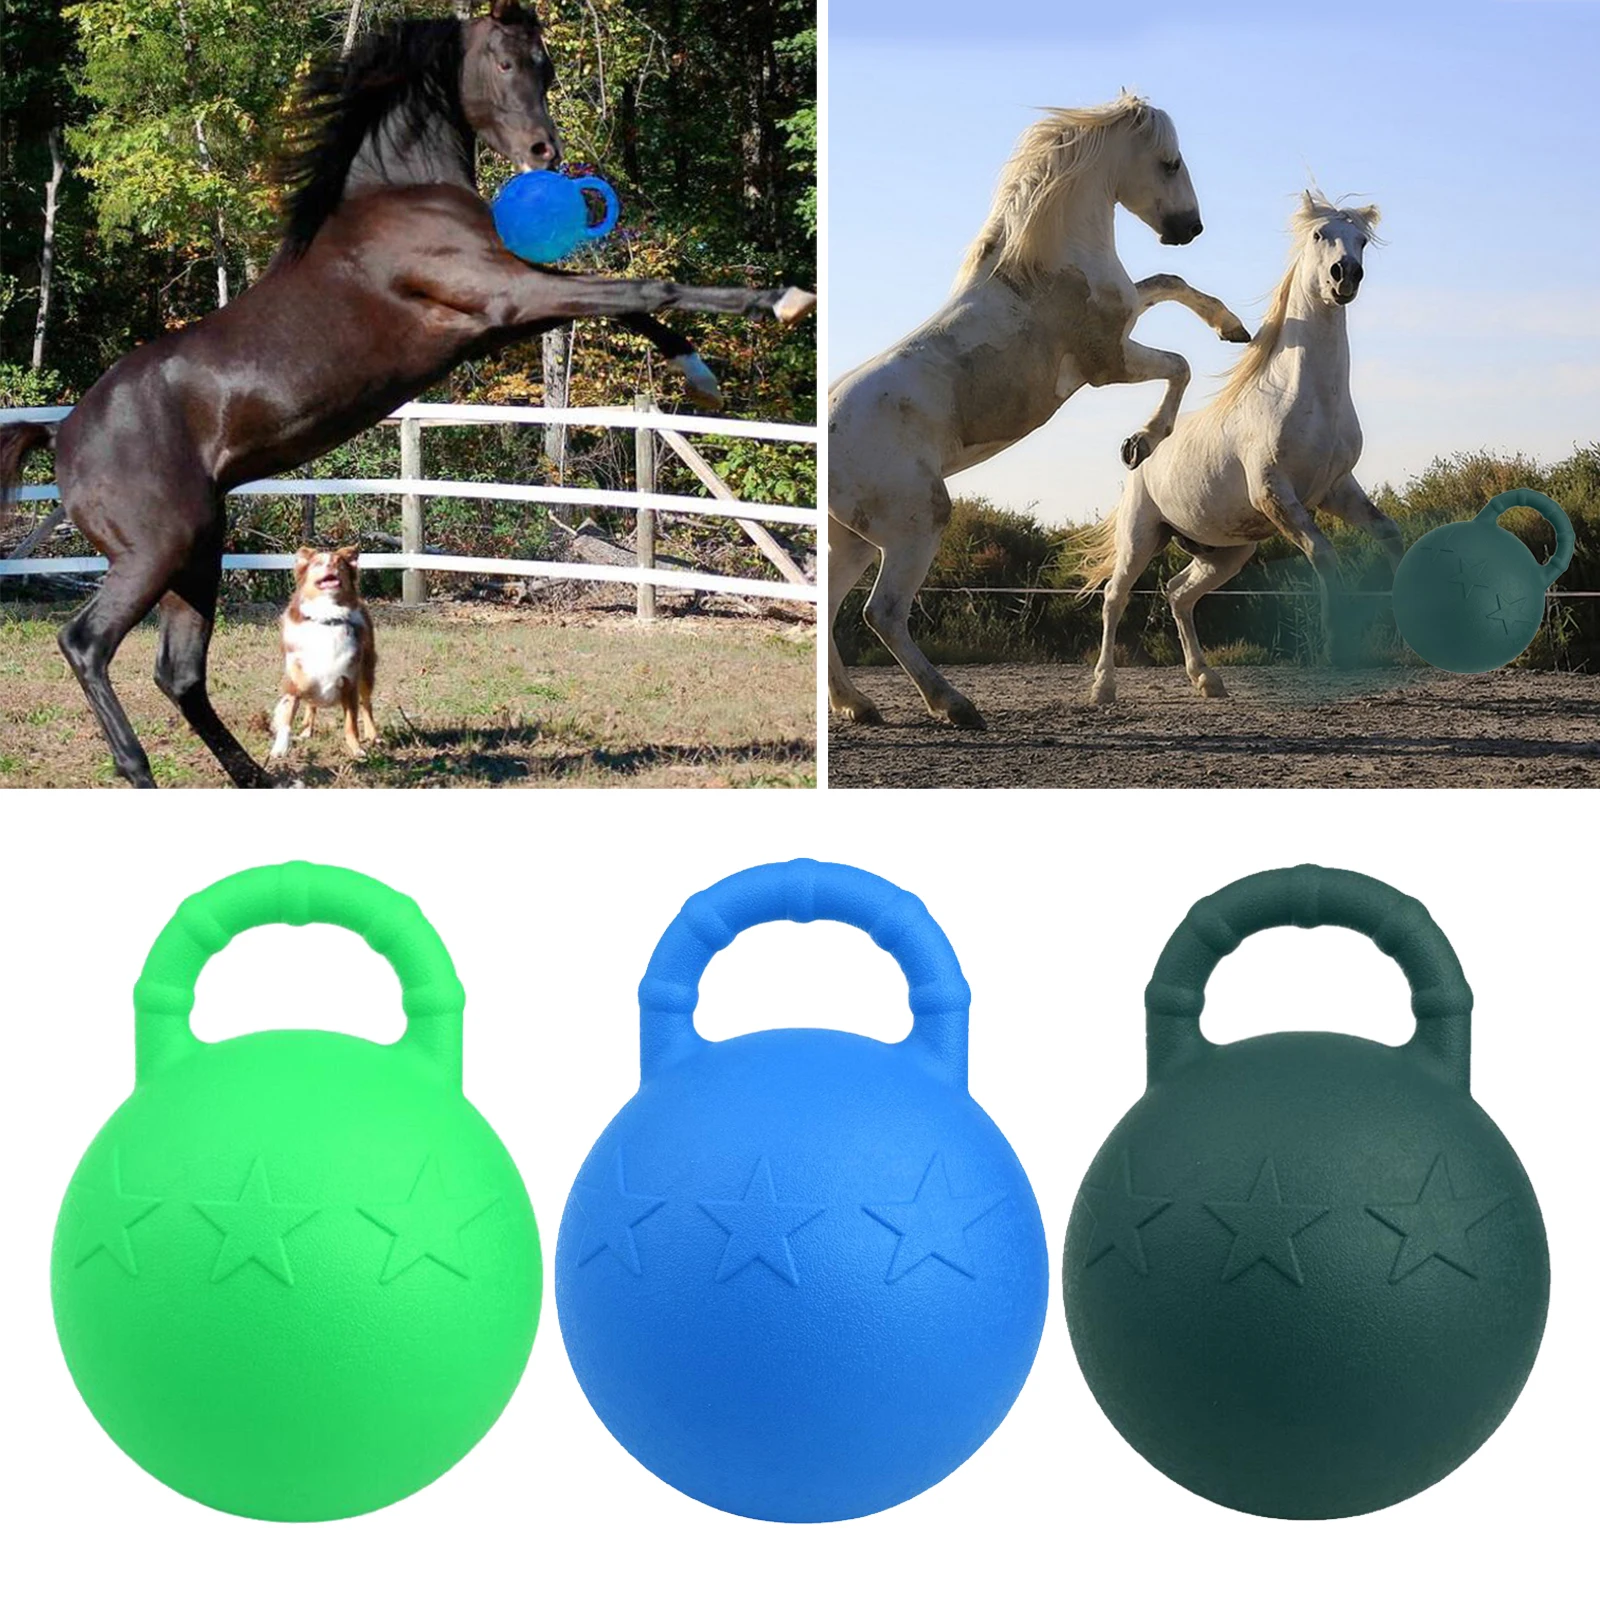 Horse Toy Game Ball with Fruit Scent Pet Joy Fun Stable Horse And Yard Toy for Horse Juggling Playing Toy